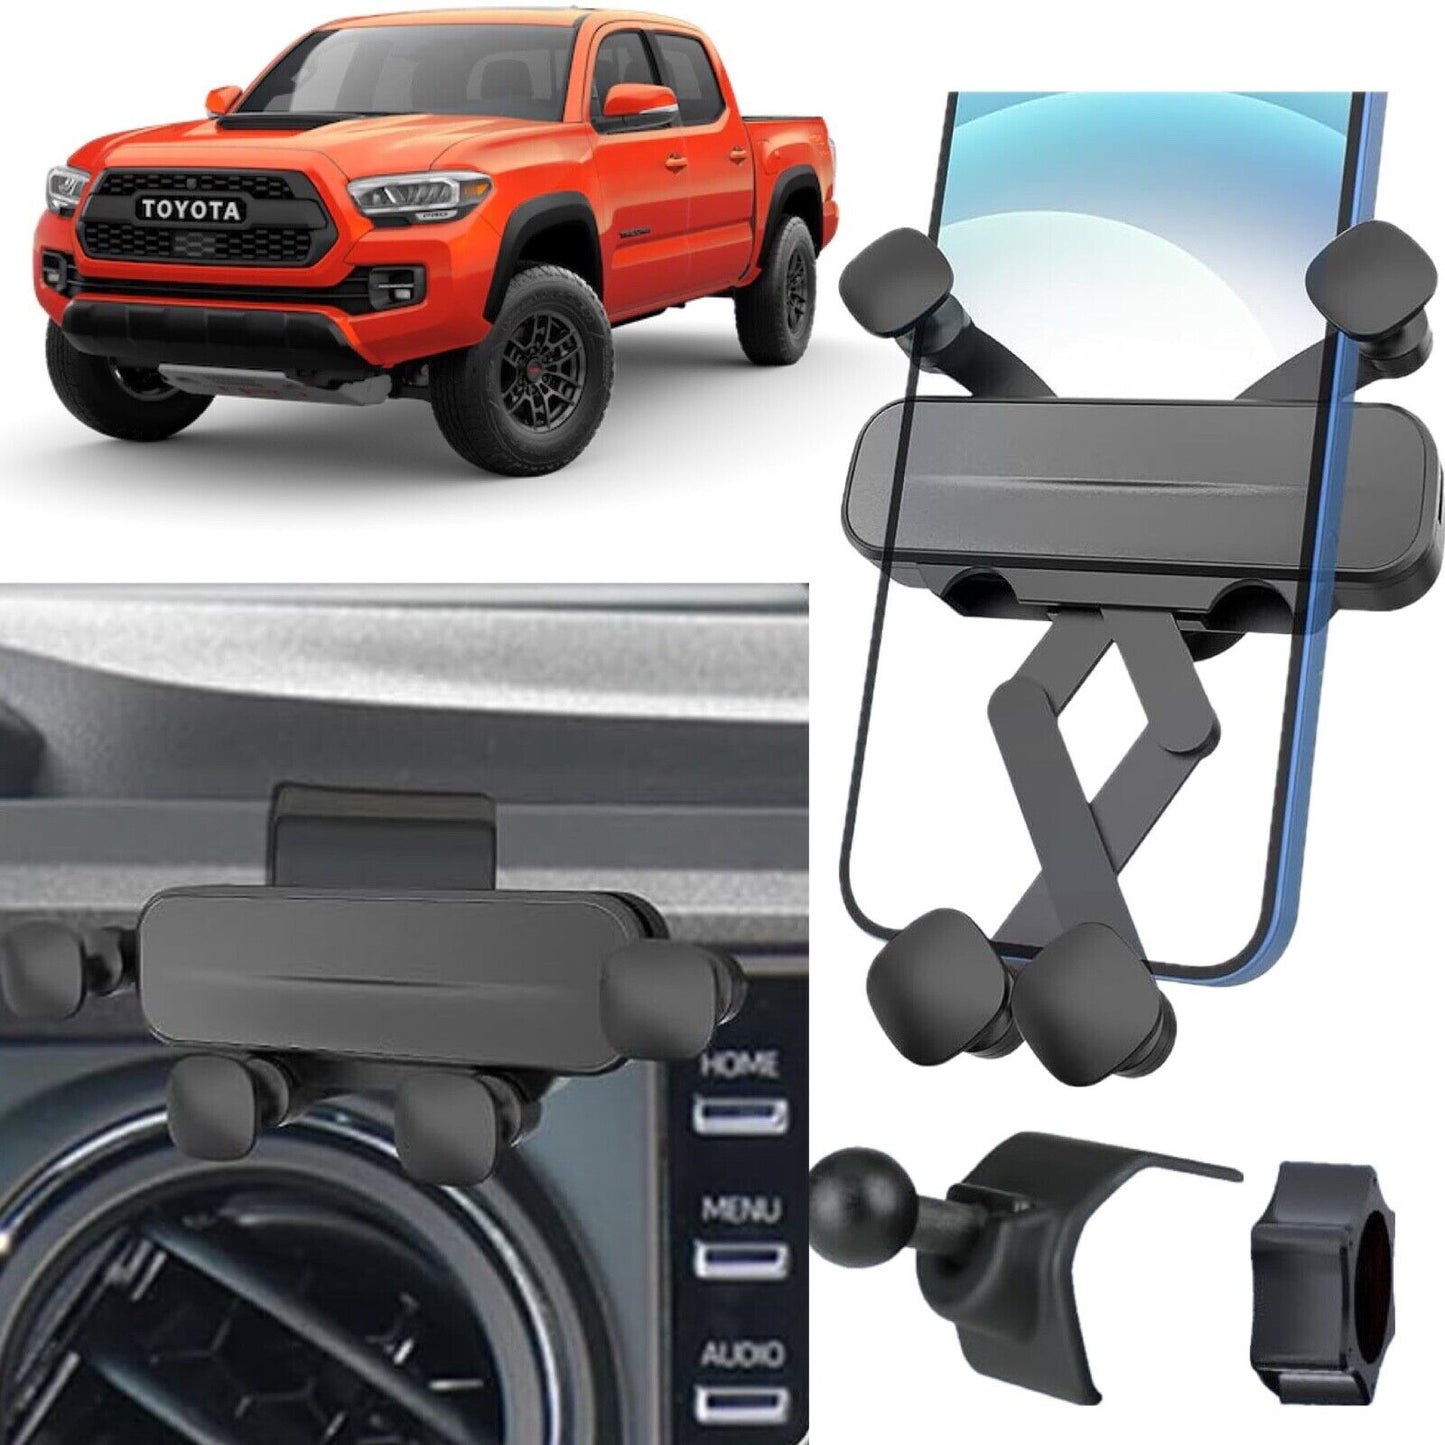 Toyota Tacoma 2016 - 2023 Mobile Cell Smartphone Bracket Mount